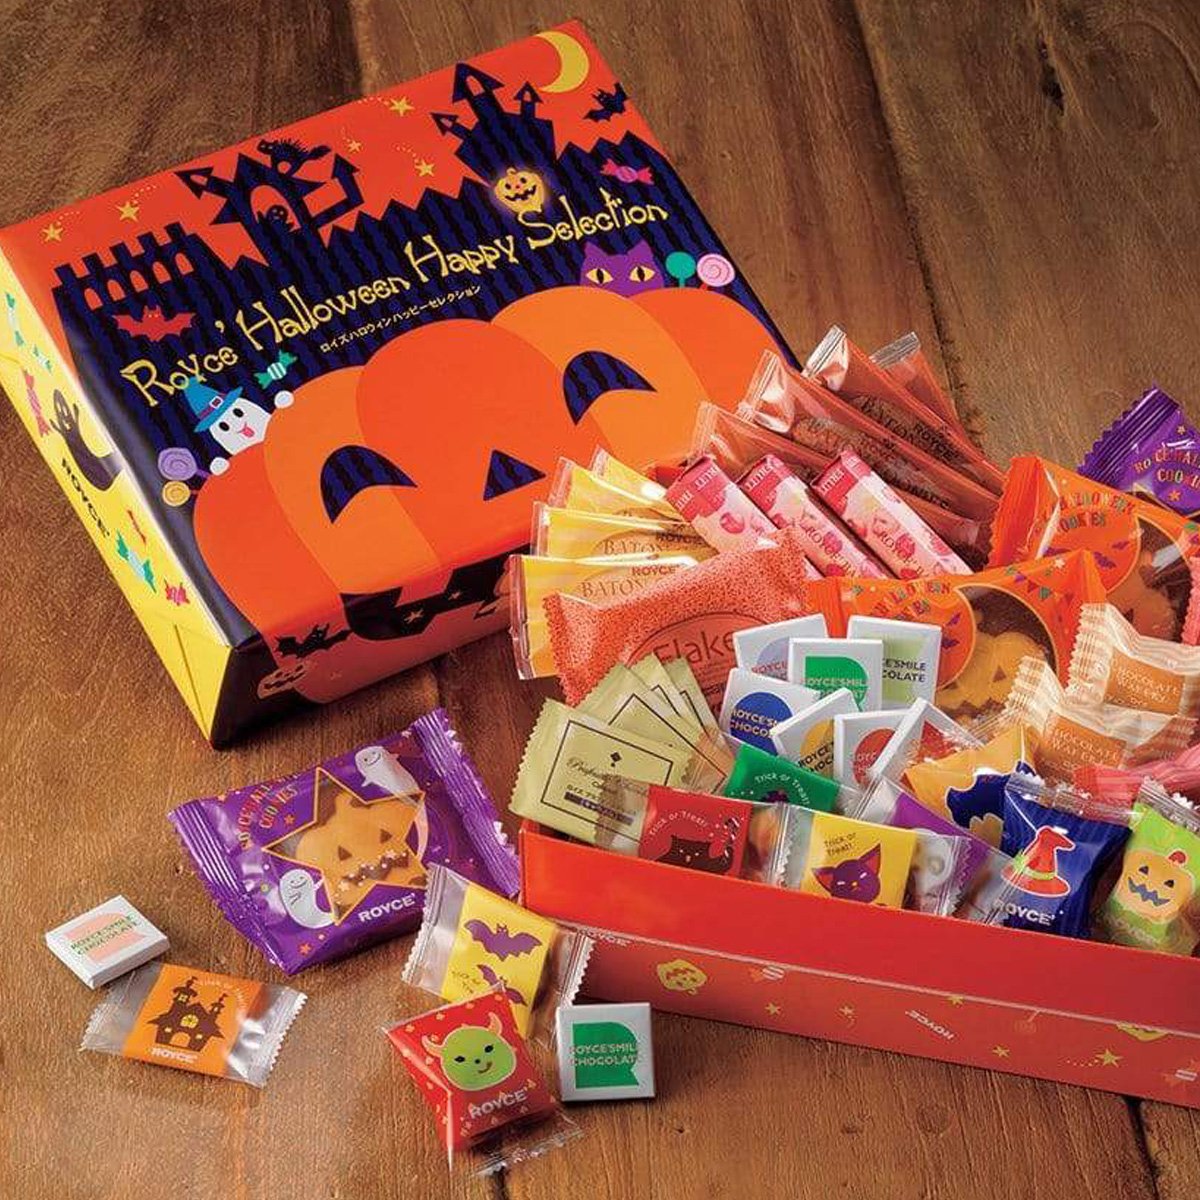 Image shows an orange box on the left with illustrations of ghosts, animals, stars, and pumpkins. Text says ROYCE' Halloween Happy Selection. Box on the right shows individually-wrapped chocolates in various prints and colors. Background is in brown wood.